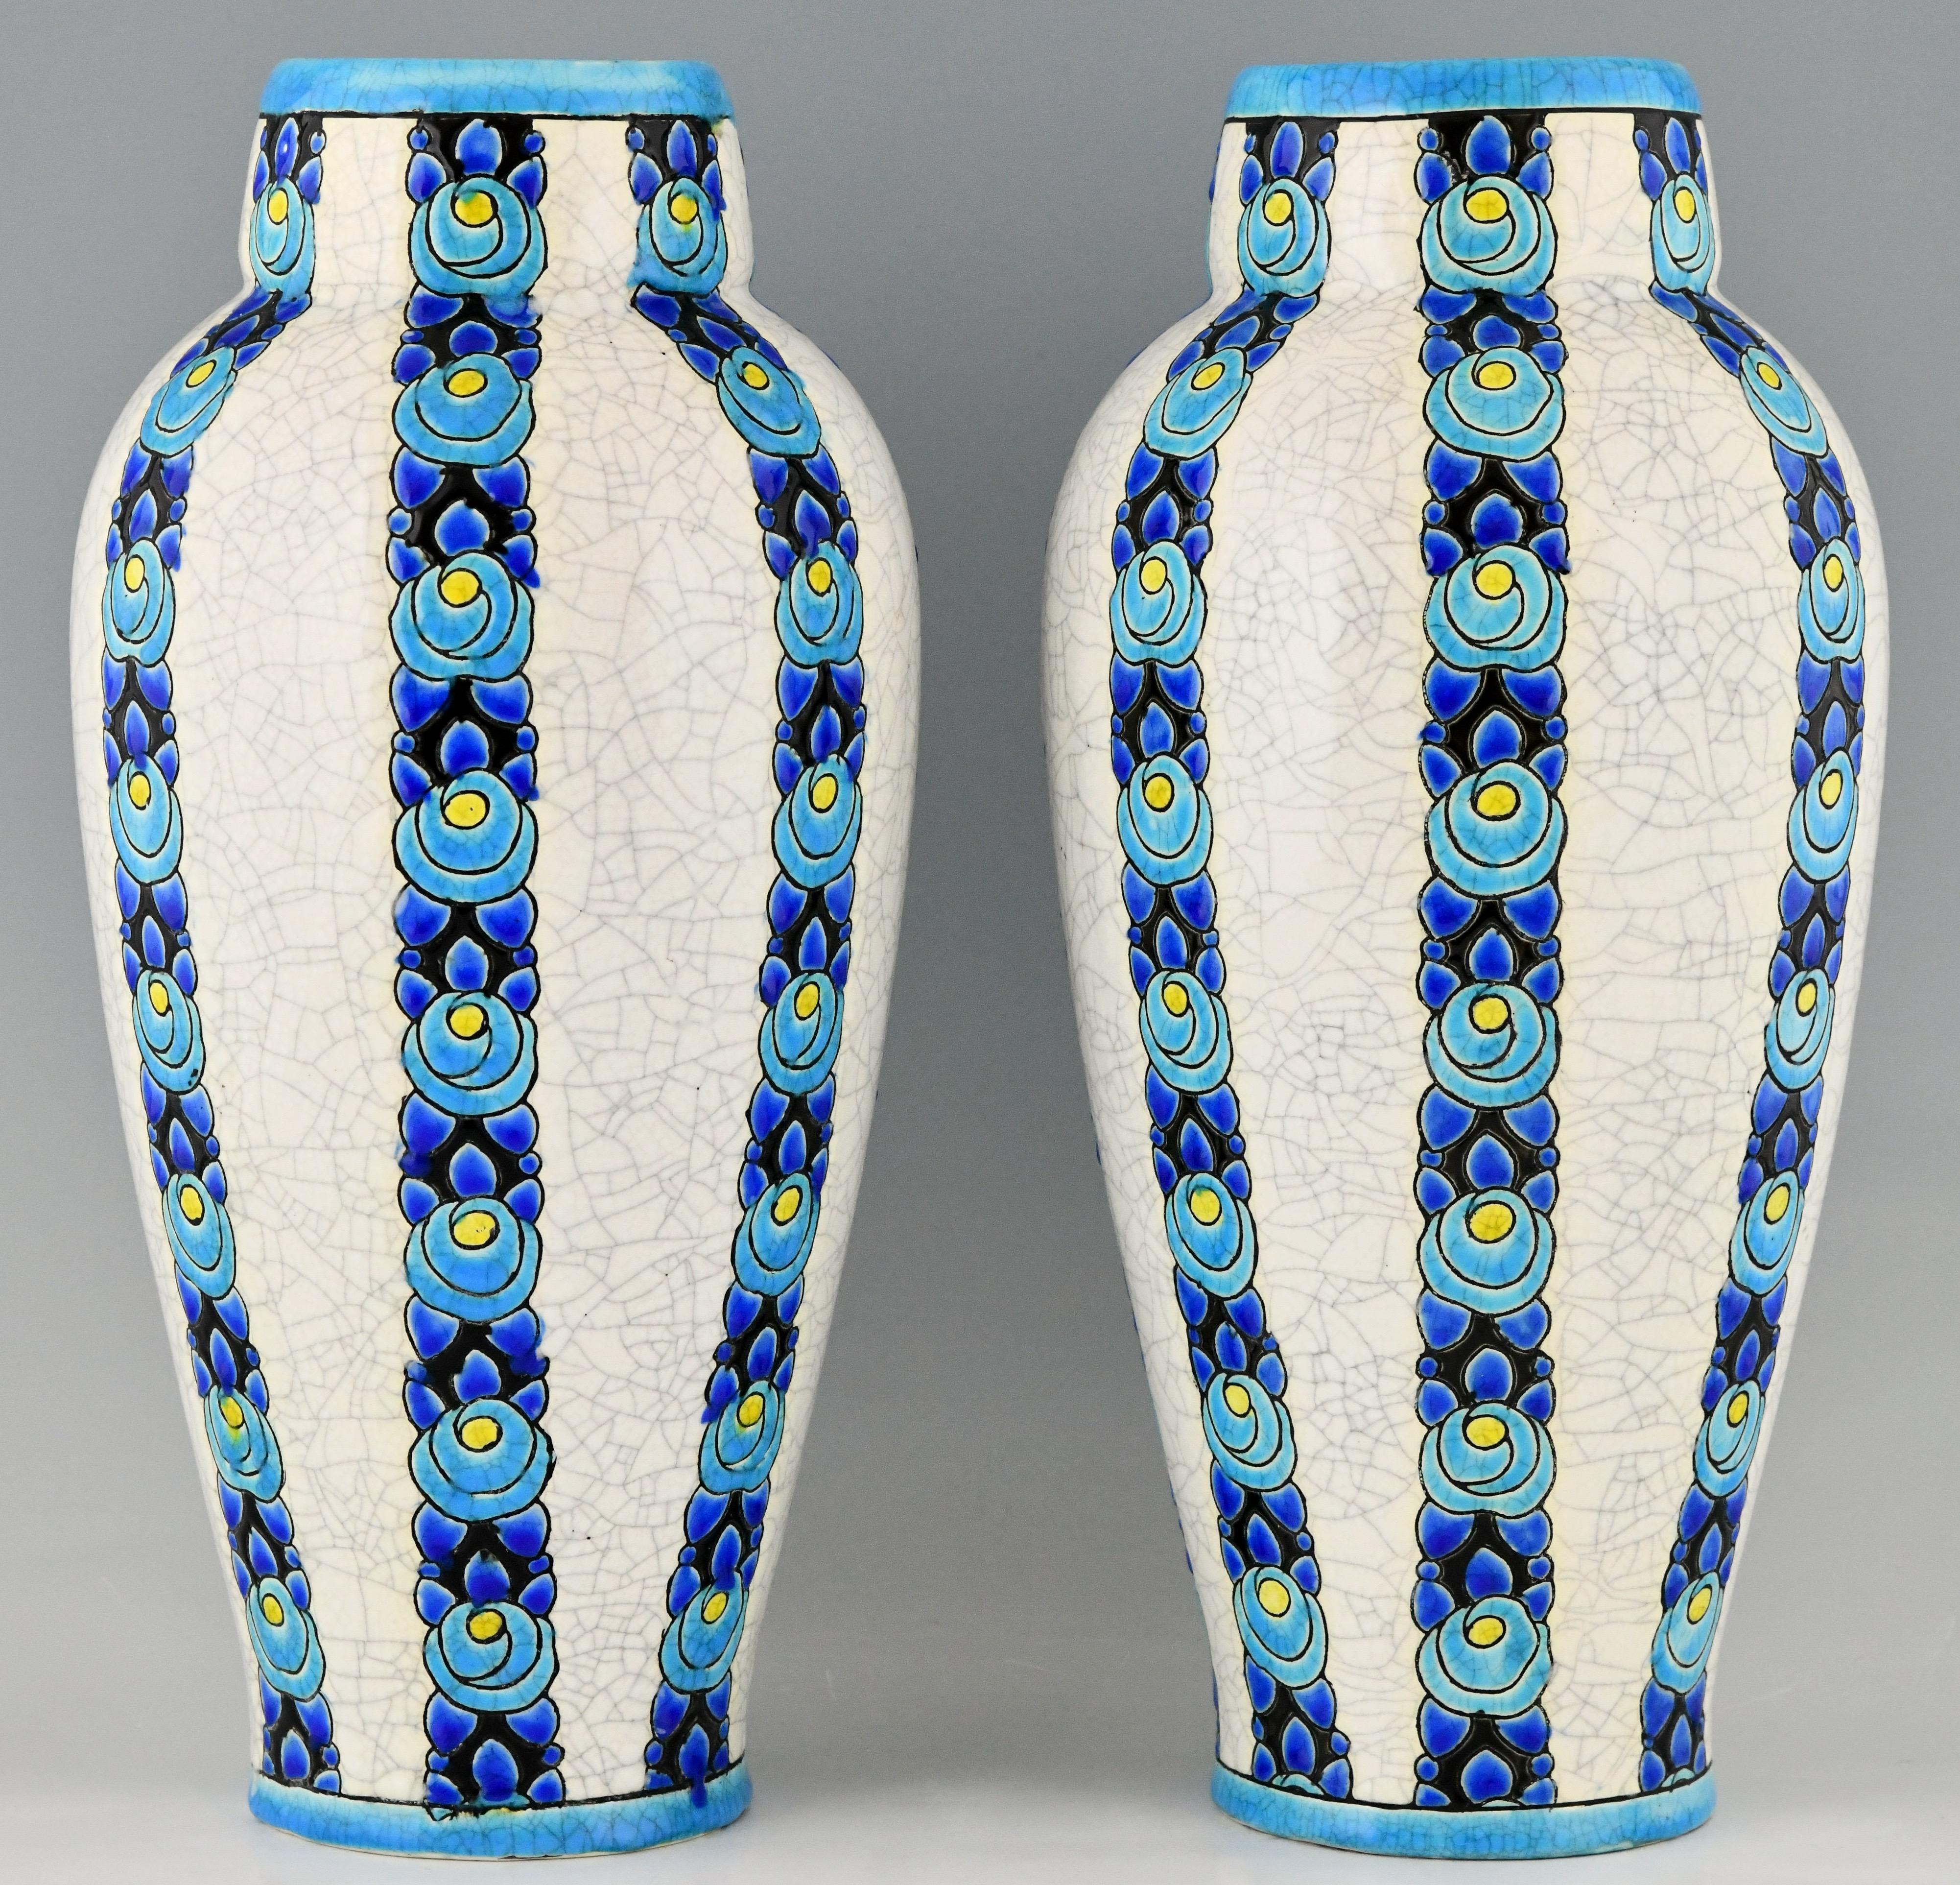 Tall pair of Art Deco turquoise, blue, yellow and white craquelé vases with flowers. Designed by Charles Catteau.
Executed by Boch Freres La Louviere, Belgium. 
Boch La Louvriere stamp. Ct for Catteau.
Numbered D704 for the